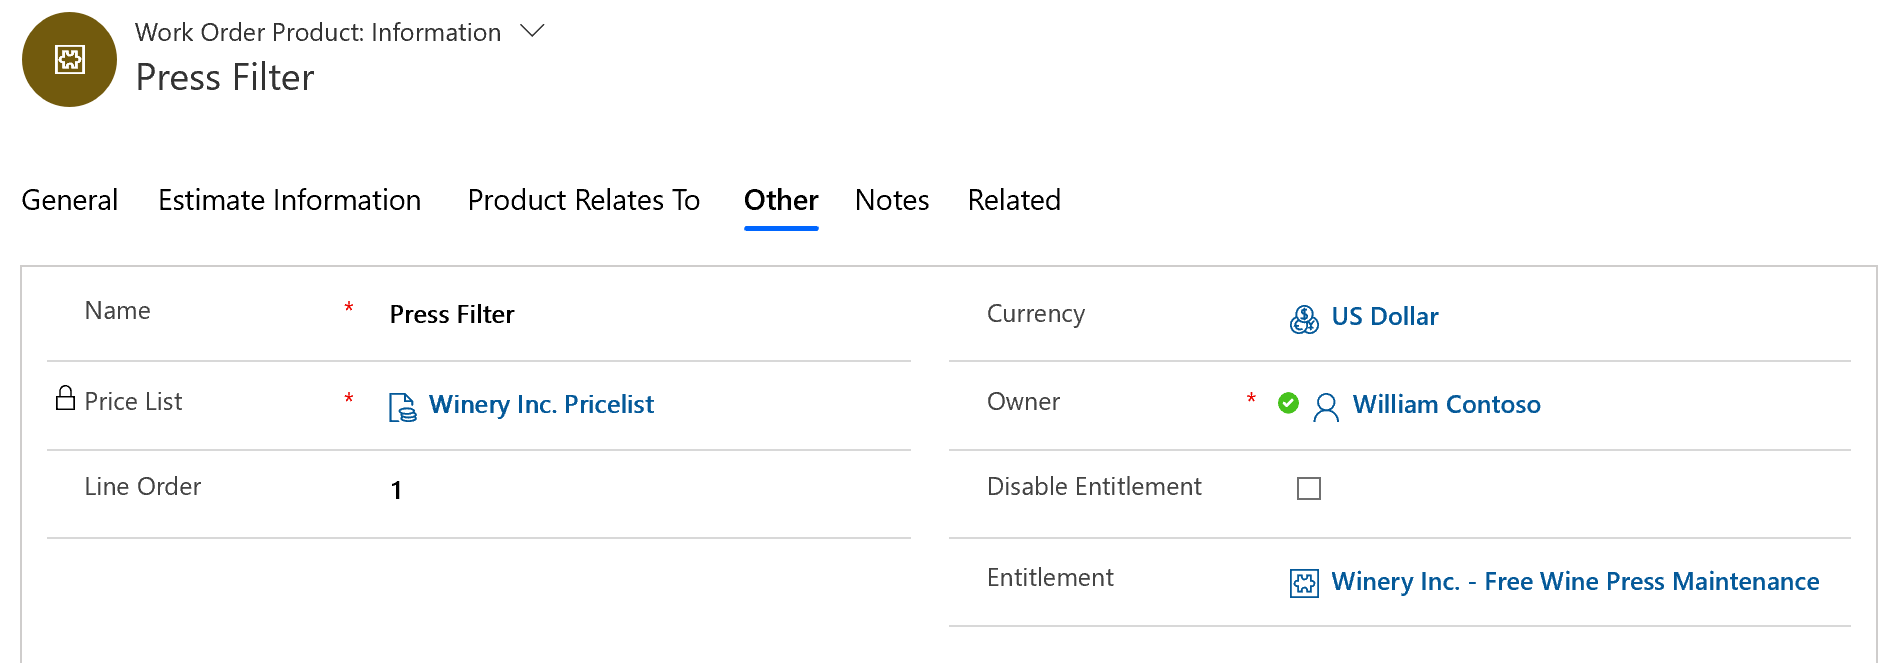 Screenshot of entitlement applied to the work order product.